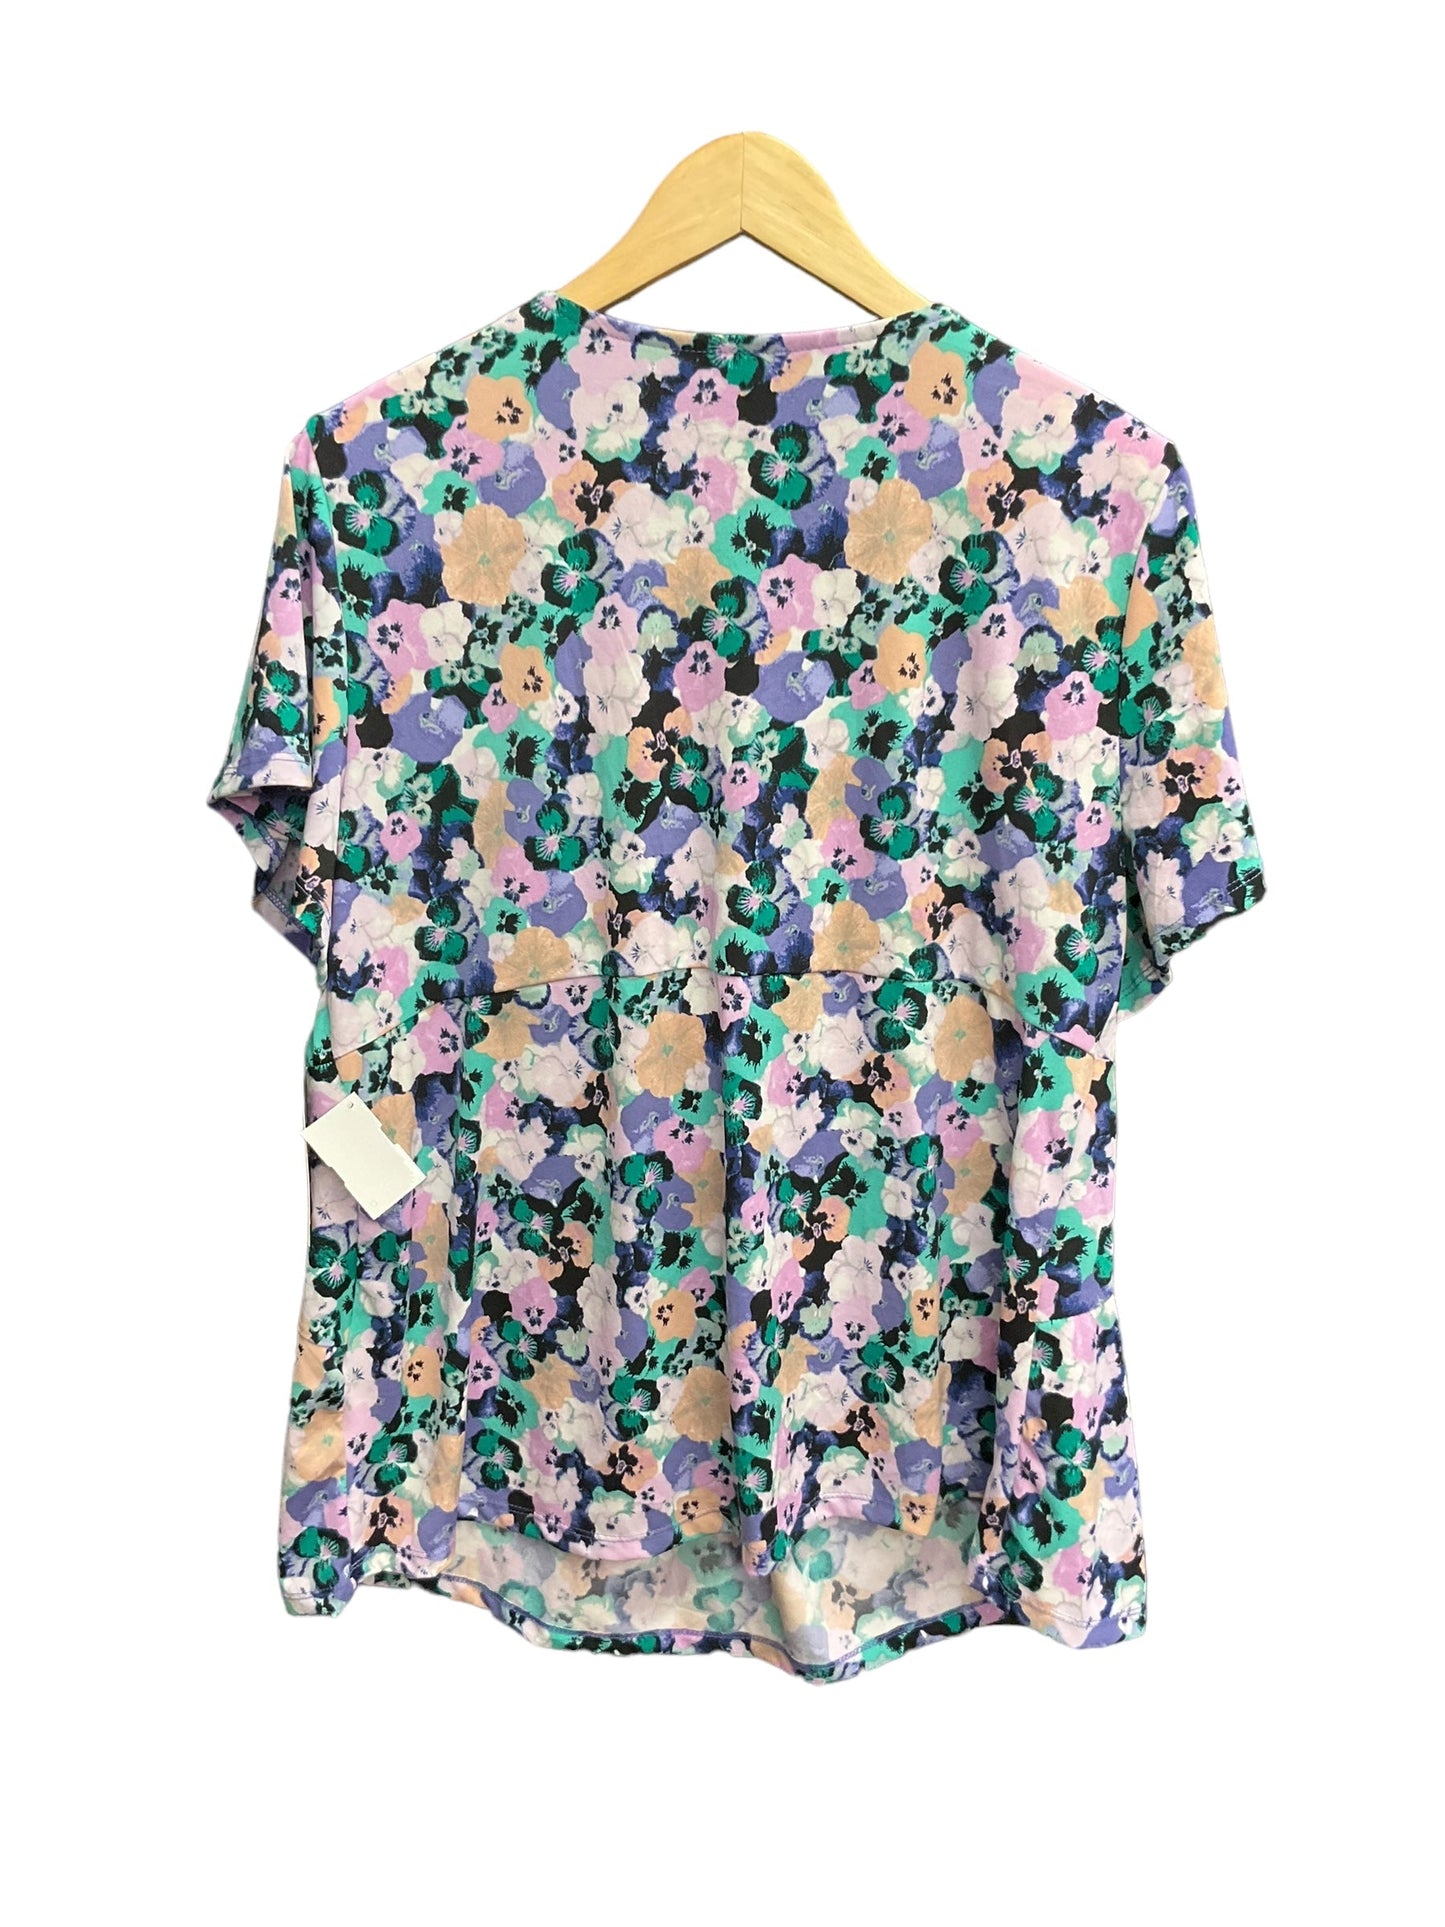 Floral Print Top Short Sleeve Daisy Fuentes, Size 2x